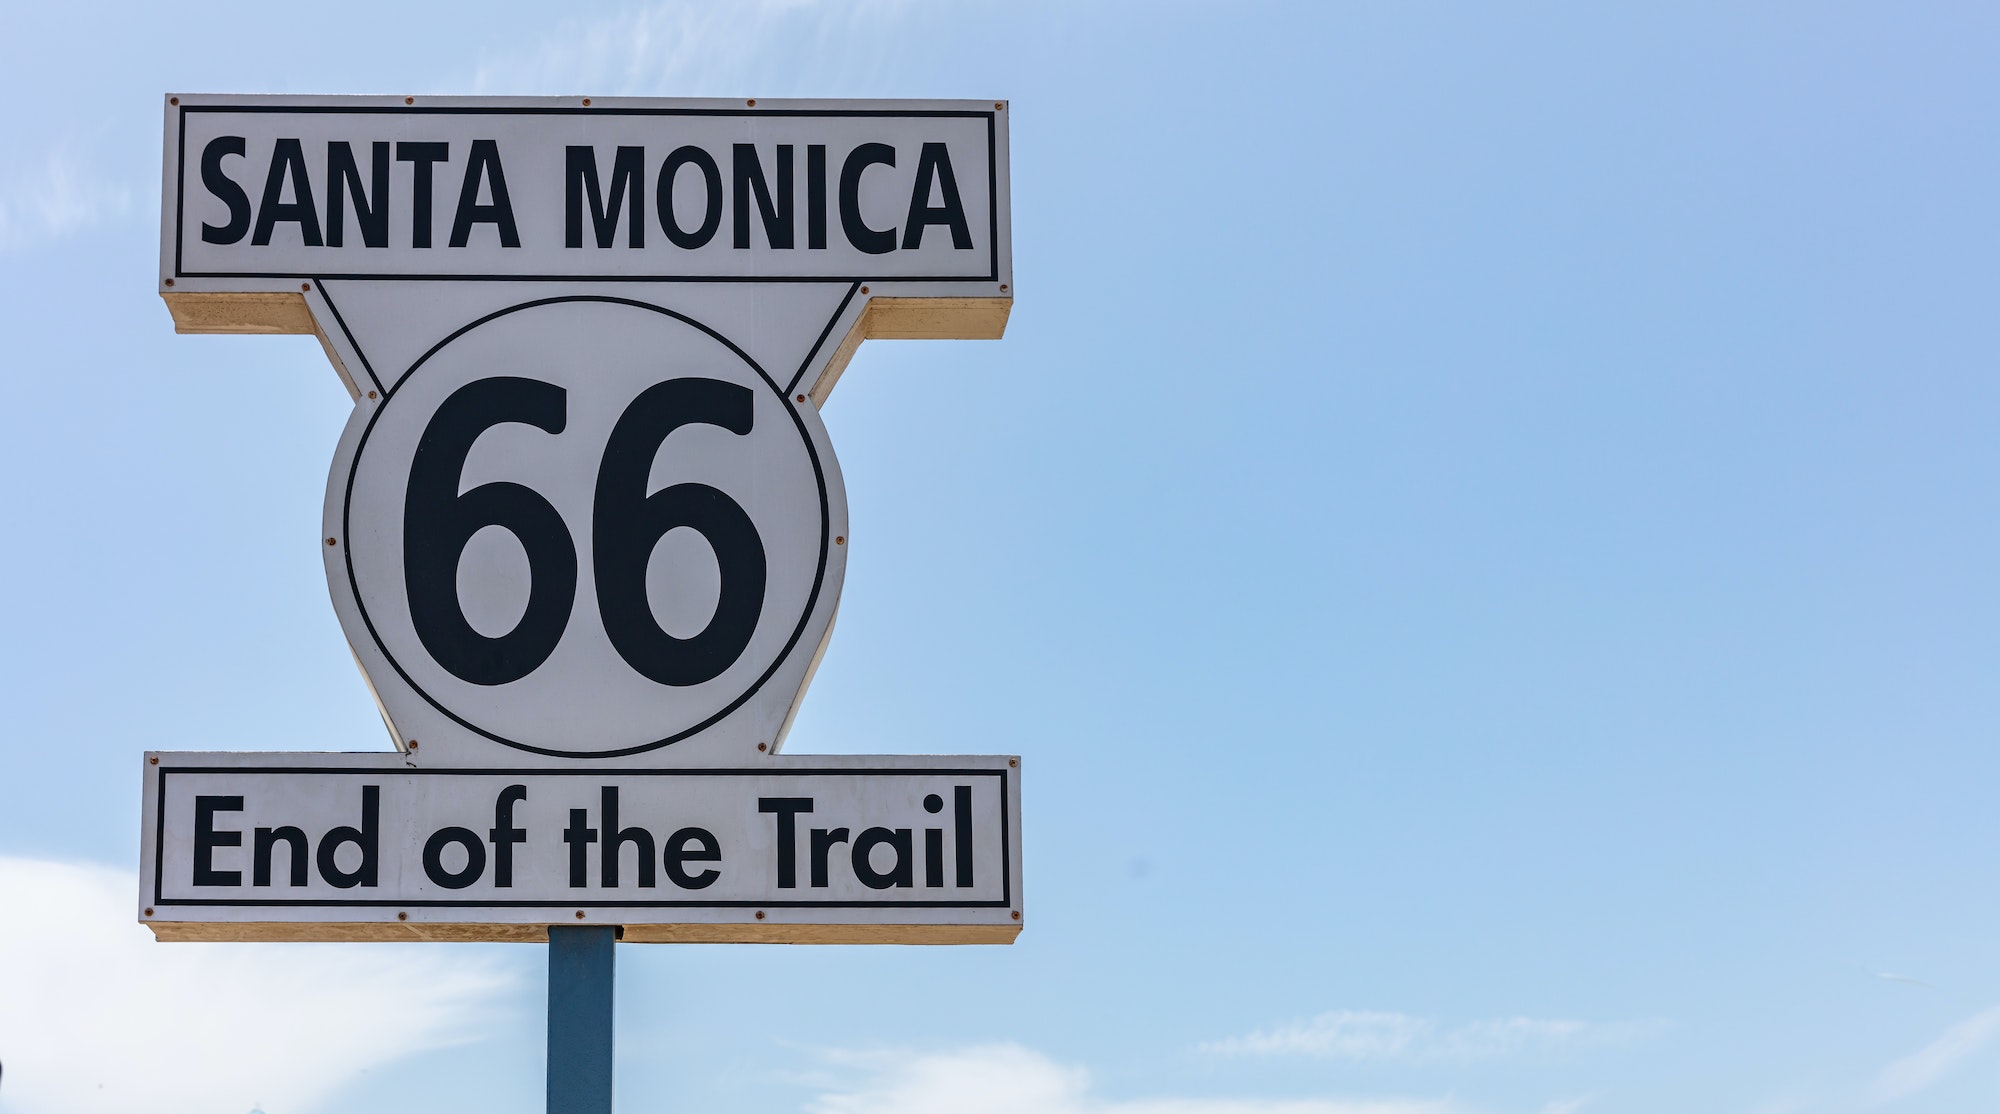 Route 66 Santa Monica End of the trail.